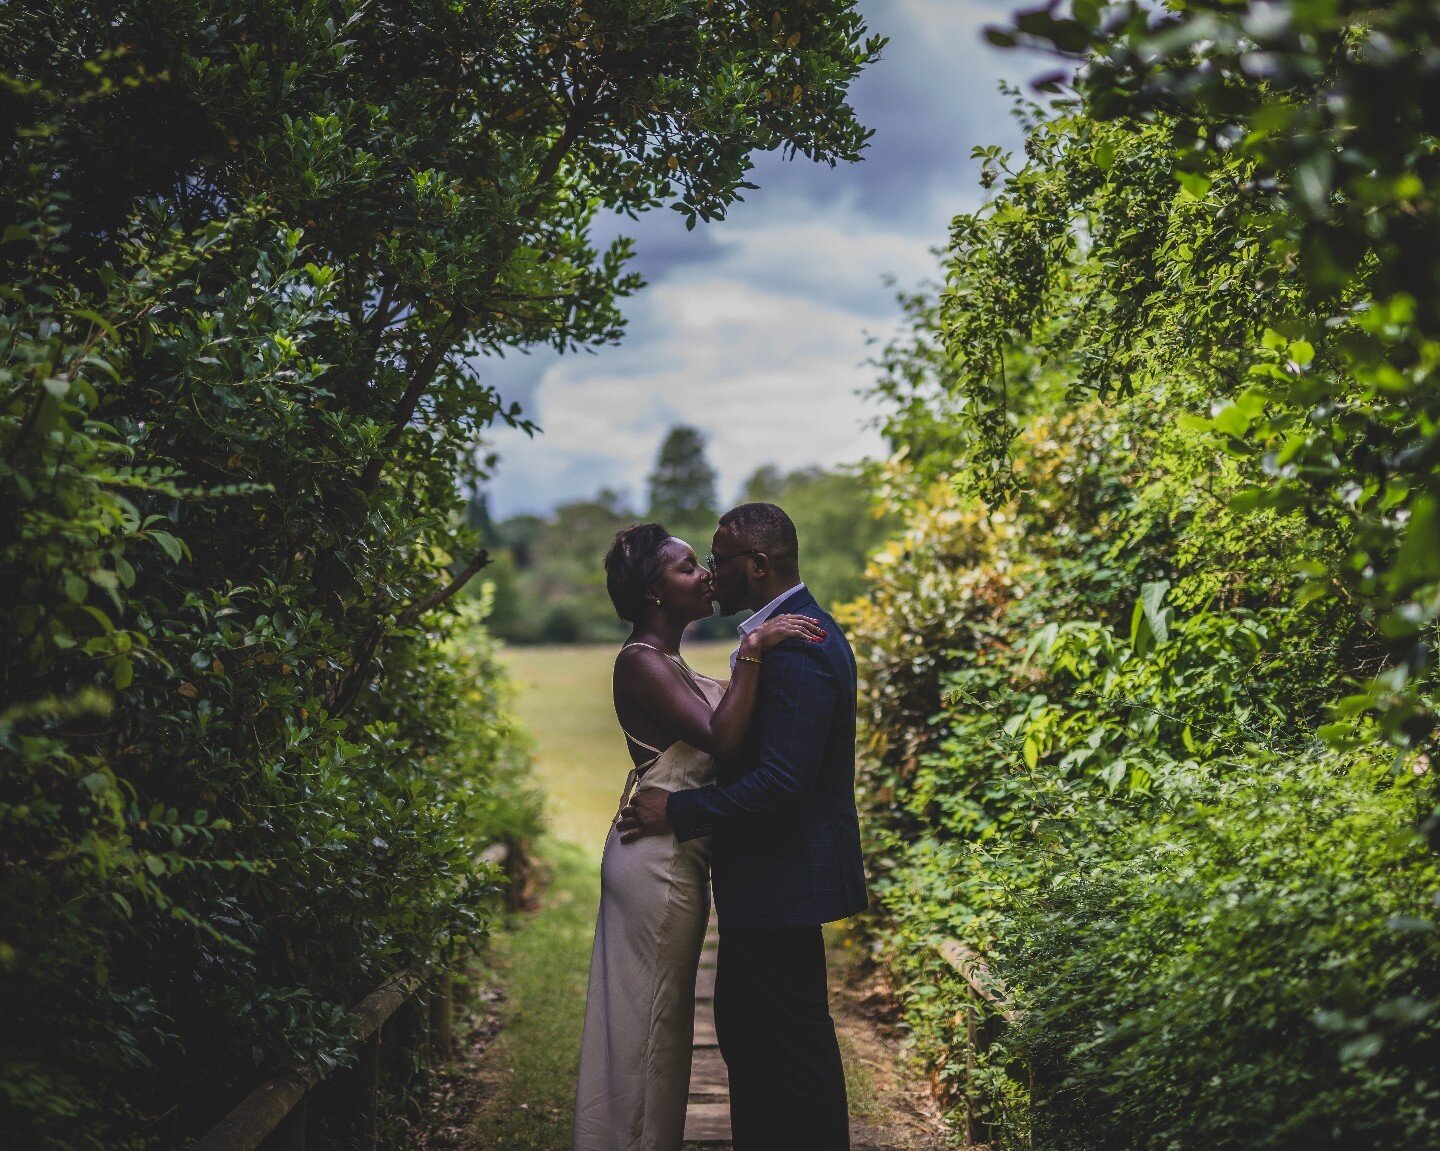 A moment captured between these two surrounded by the natural beauty of Dulwich Park.